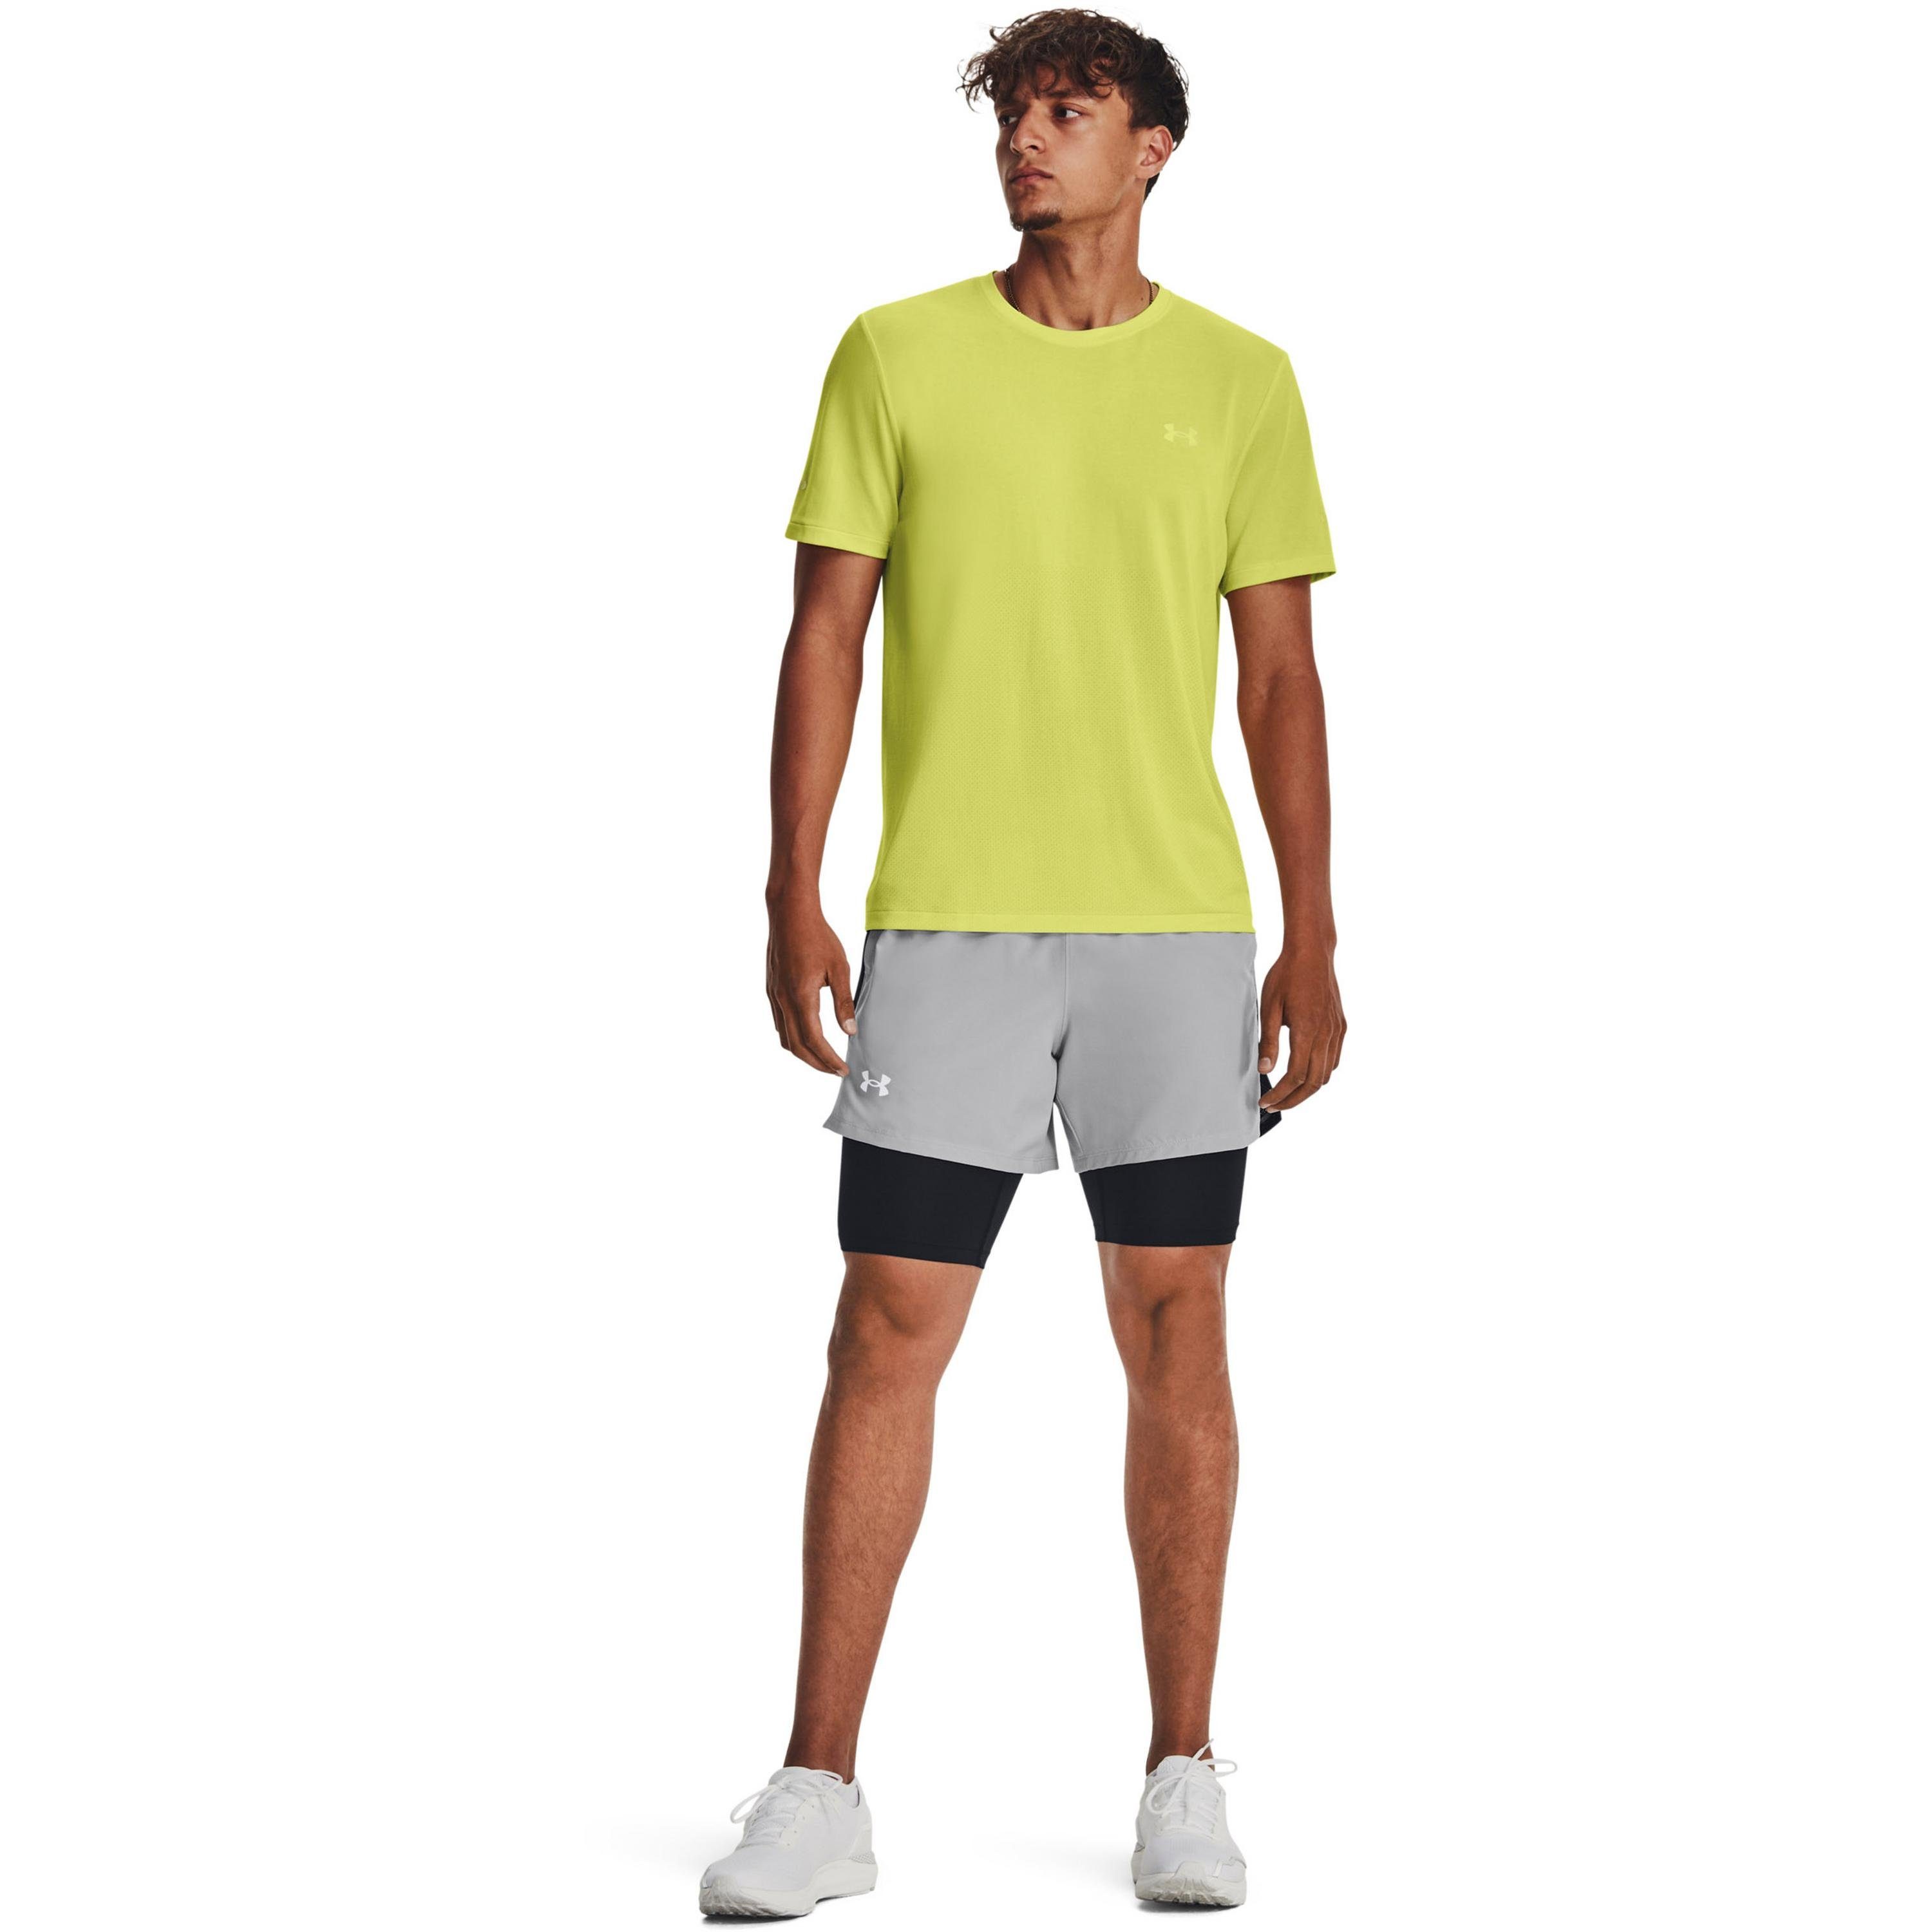 Under Armour® Funktionsshirt SEAMLESS STRIDE yellow lime